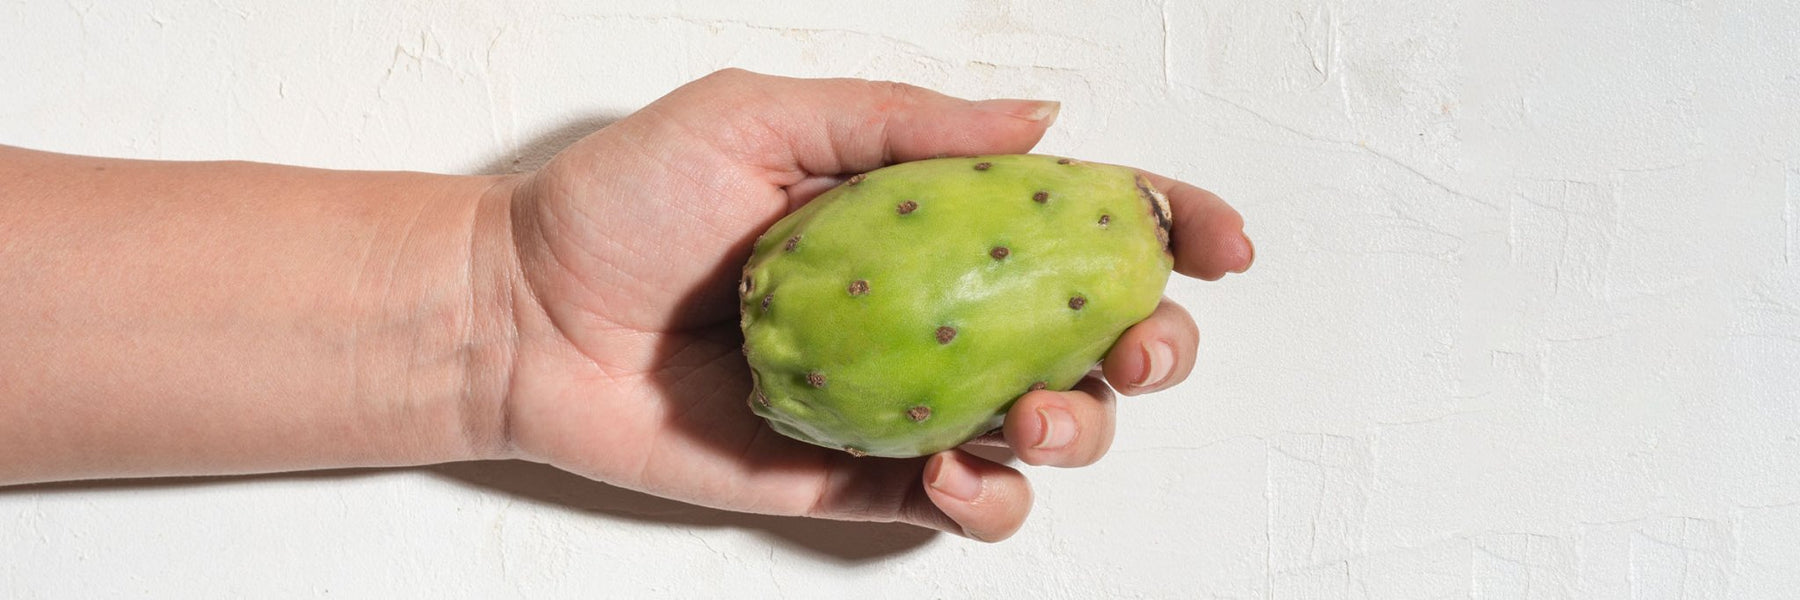 Prickly Pear Seed Oil for Skin: Benefits, How to Use